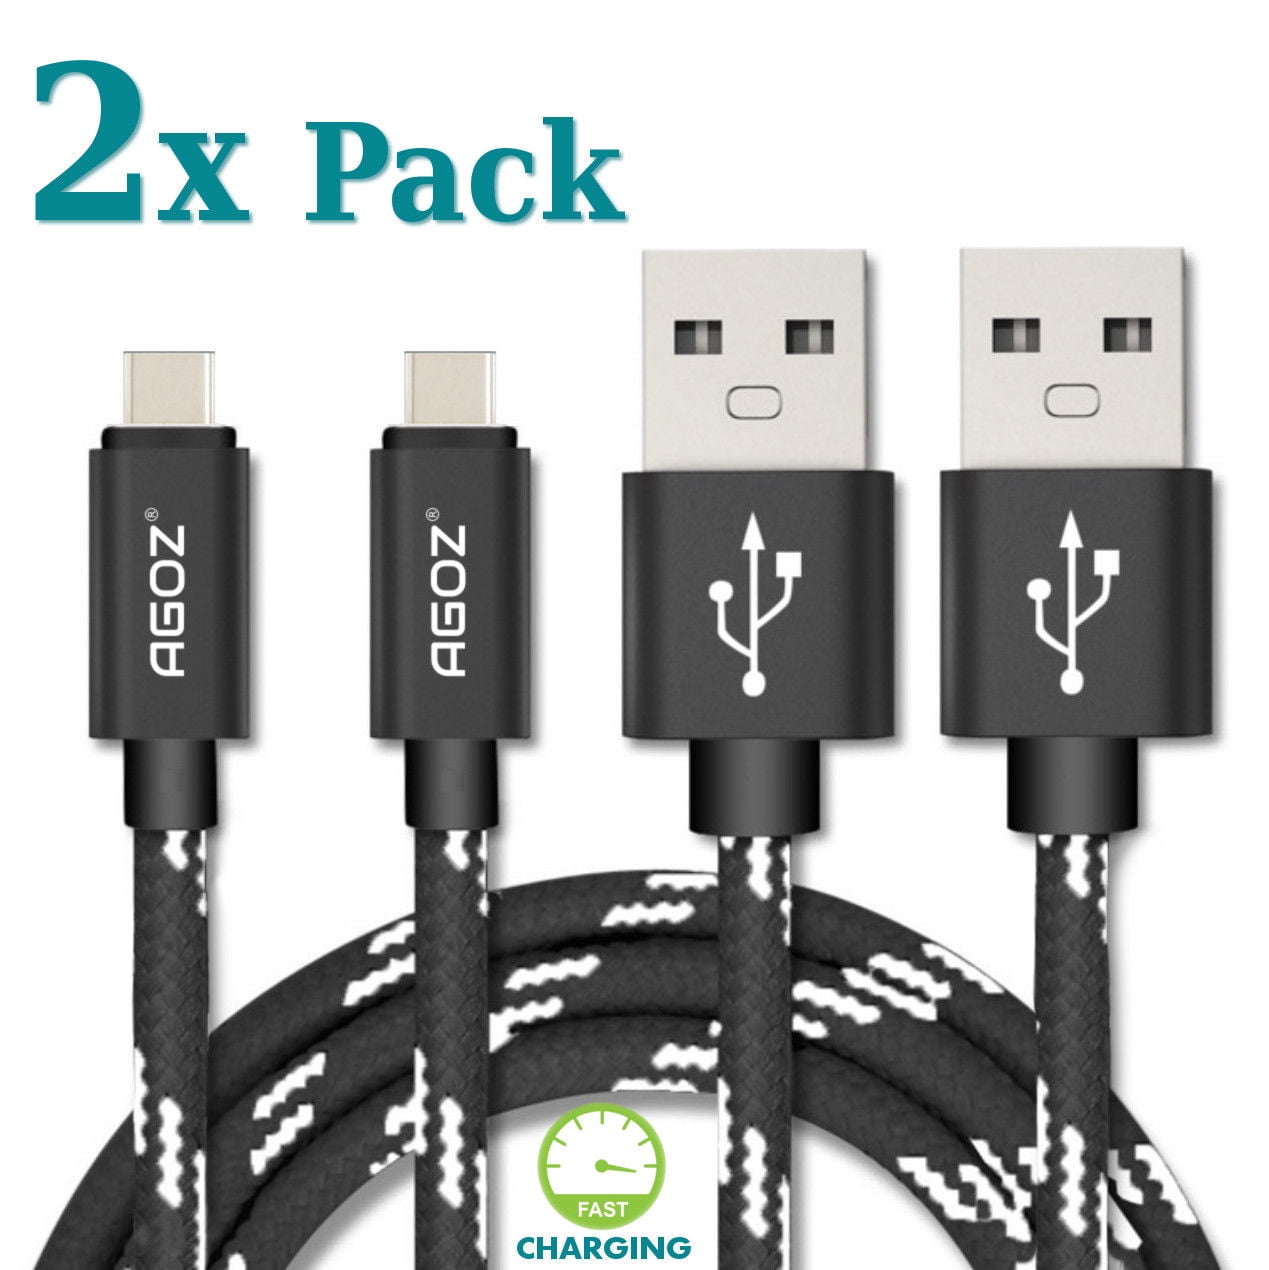 4-Pack USB C Cable Fast Charging A10e A20 A51 A71 Moto G8 G7 etguuds Nylon Braided USB A to C Type Charger Cord Compatible with Samsung Galaxy S20 S10 S9 S8 Plus S10E Note 20 10 9 8 1/3/6/10 ft 